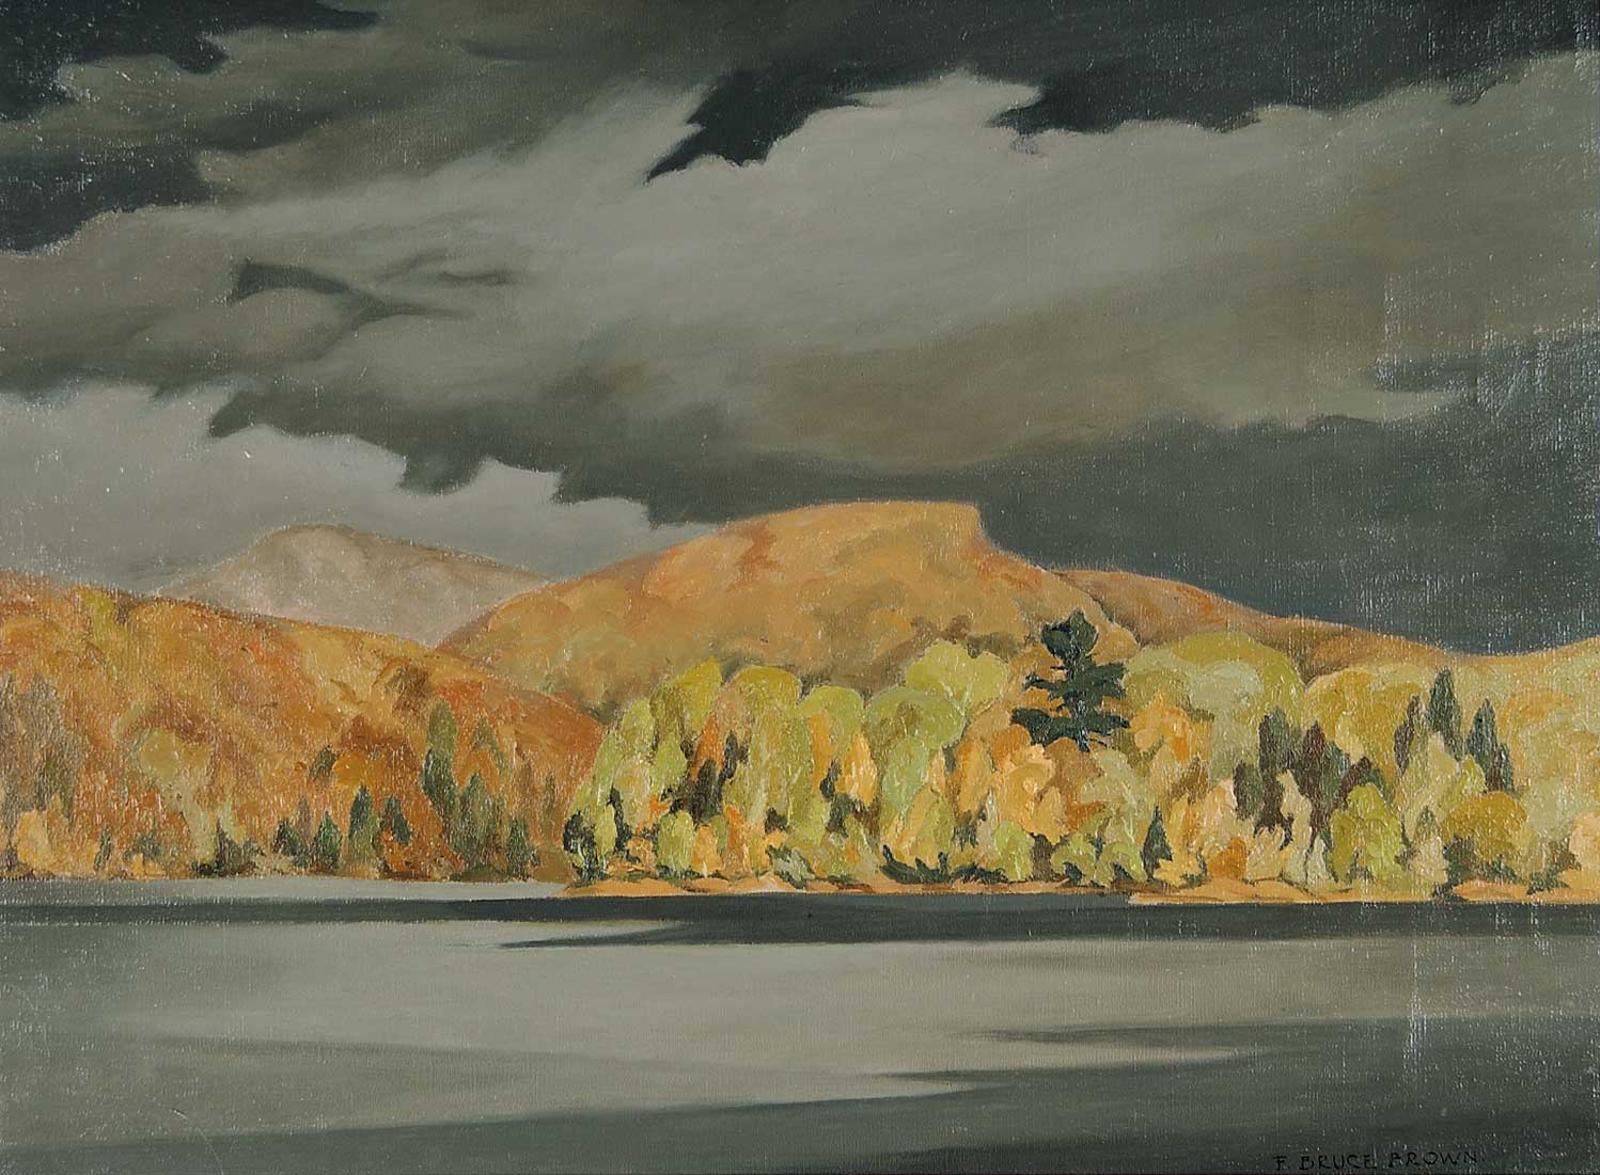 F. Bruce Brown - Coming Storm, Oxtongue Lake